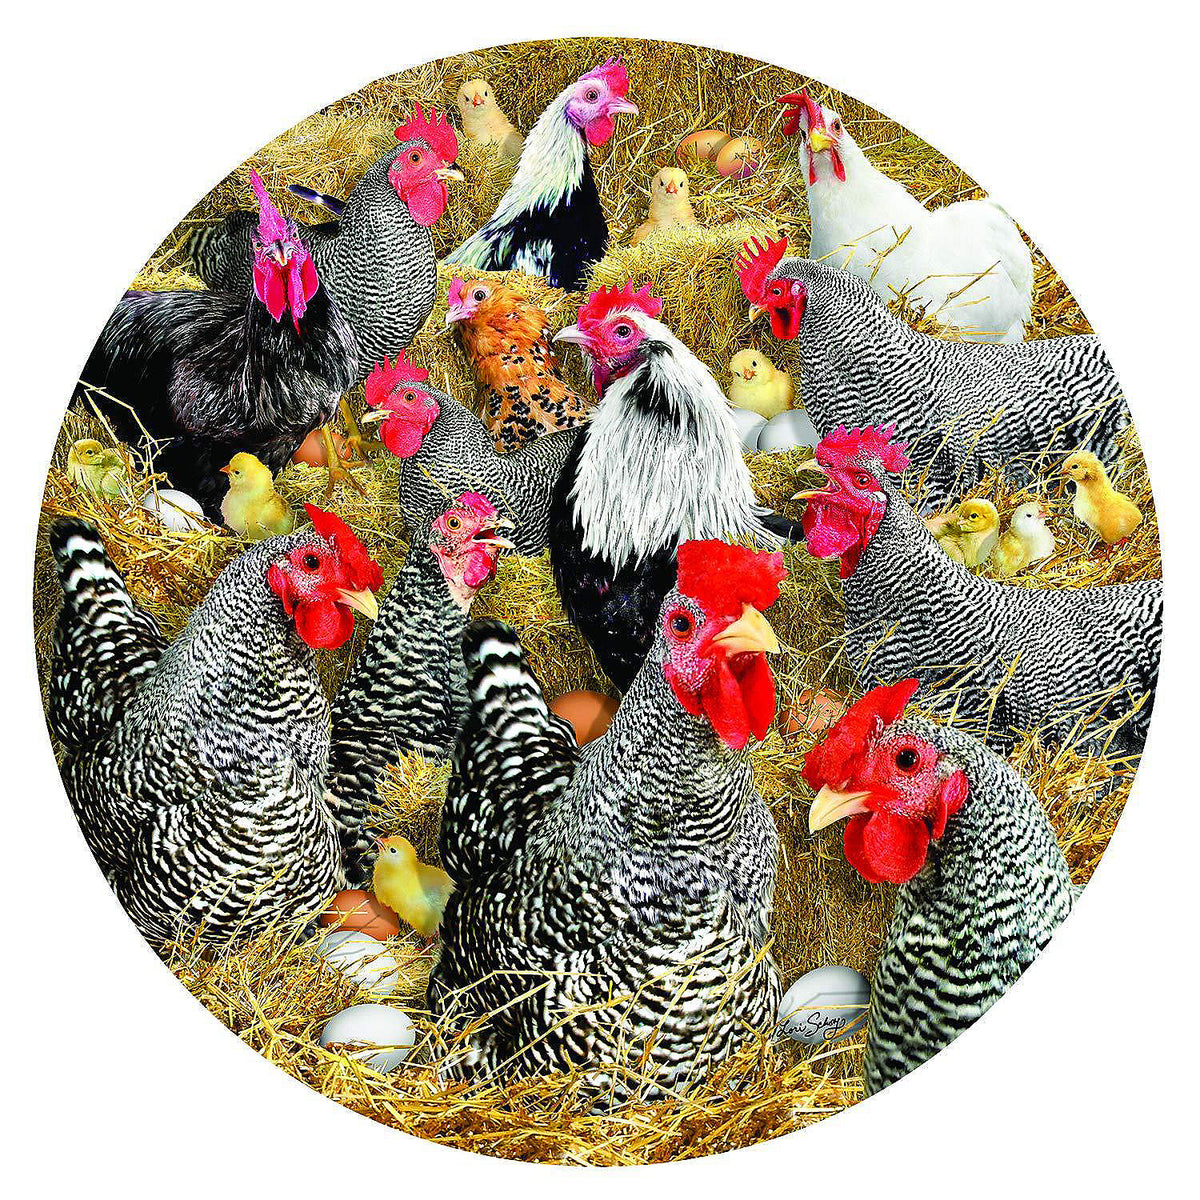 Games | Puzzle- Chickens and Chicks 1000 pc